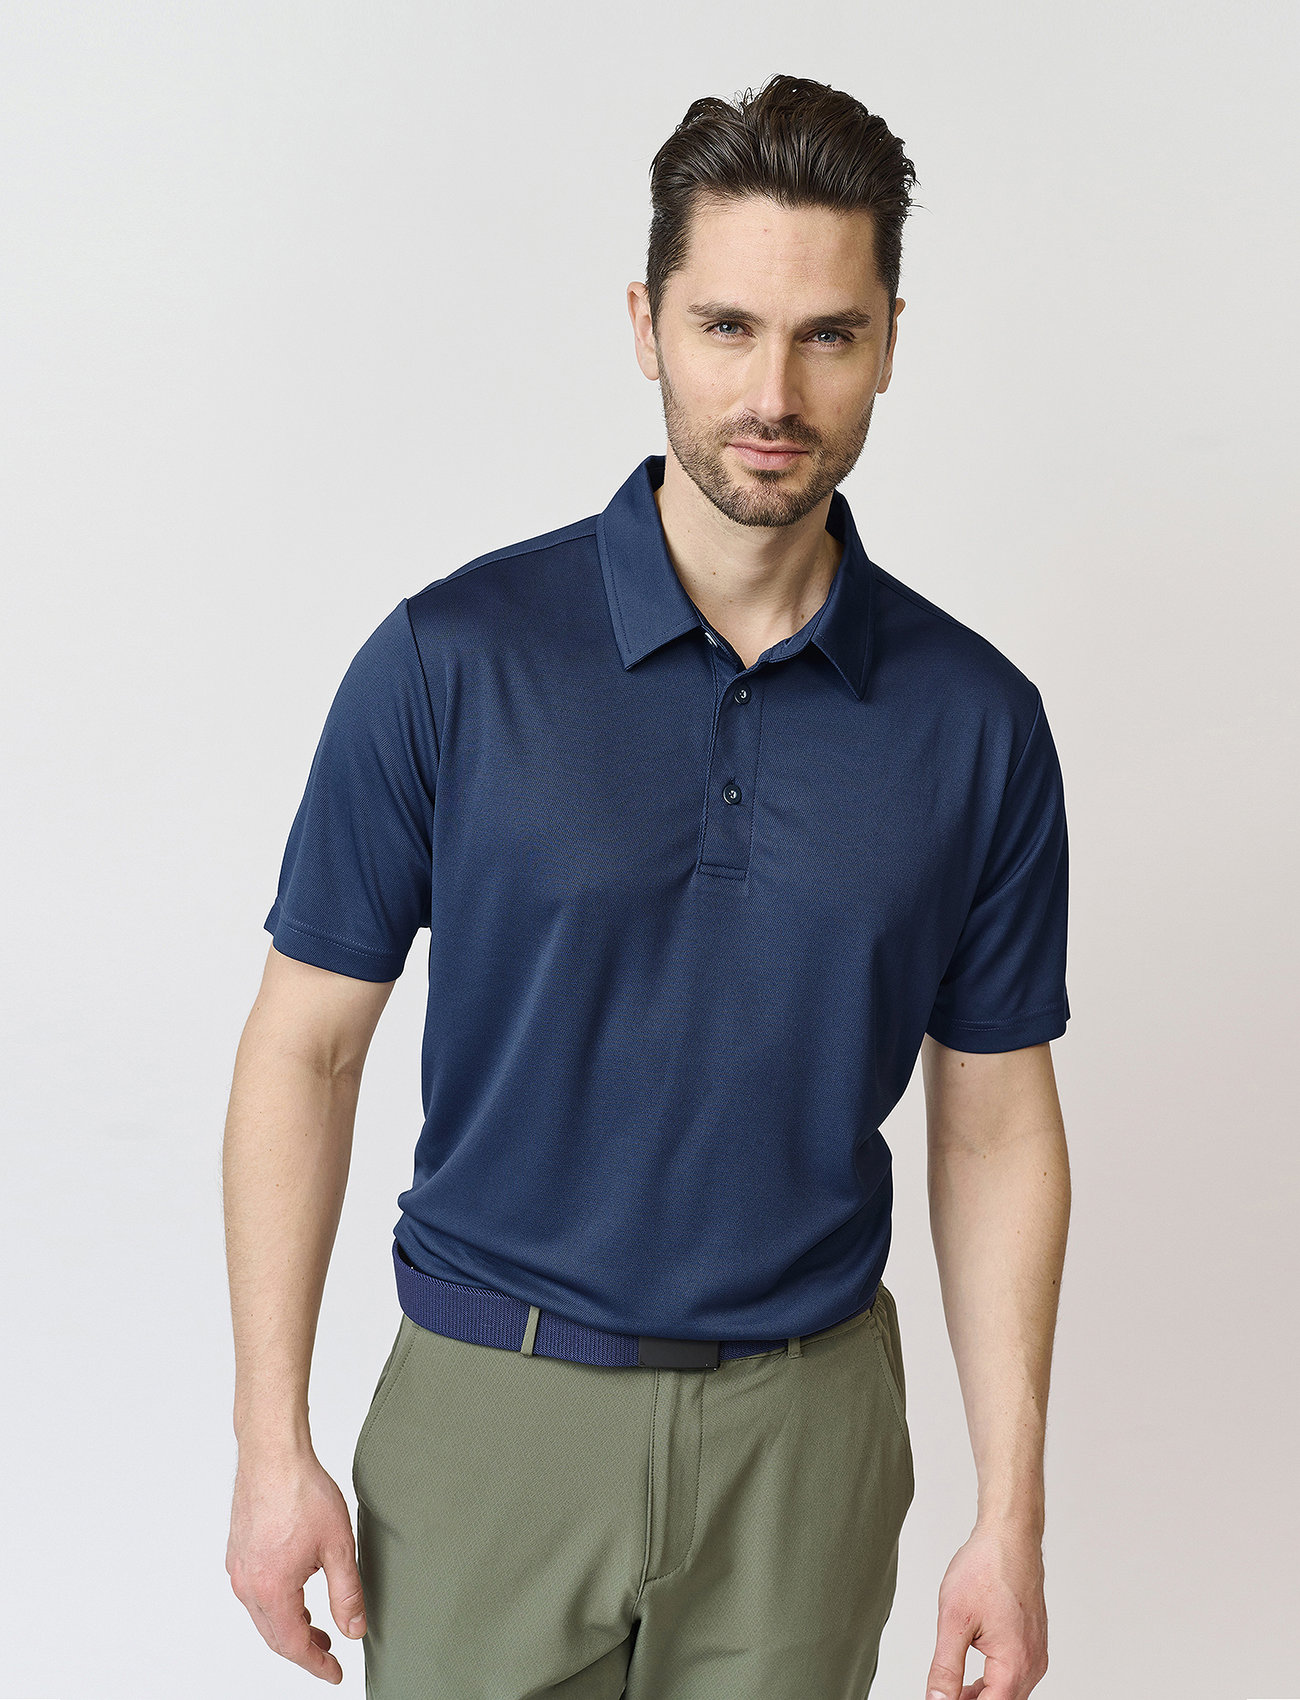 BACKTEE - Mens Performance Polo - lyhythihaiset - navy - 1